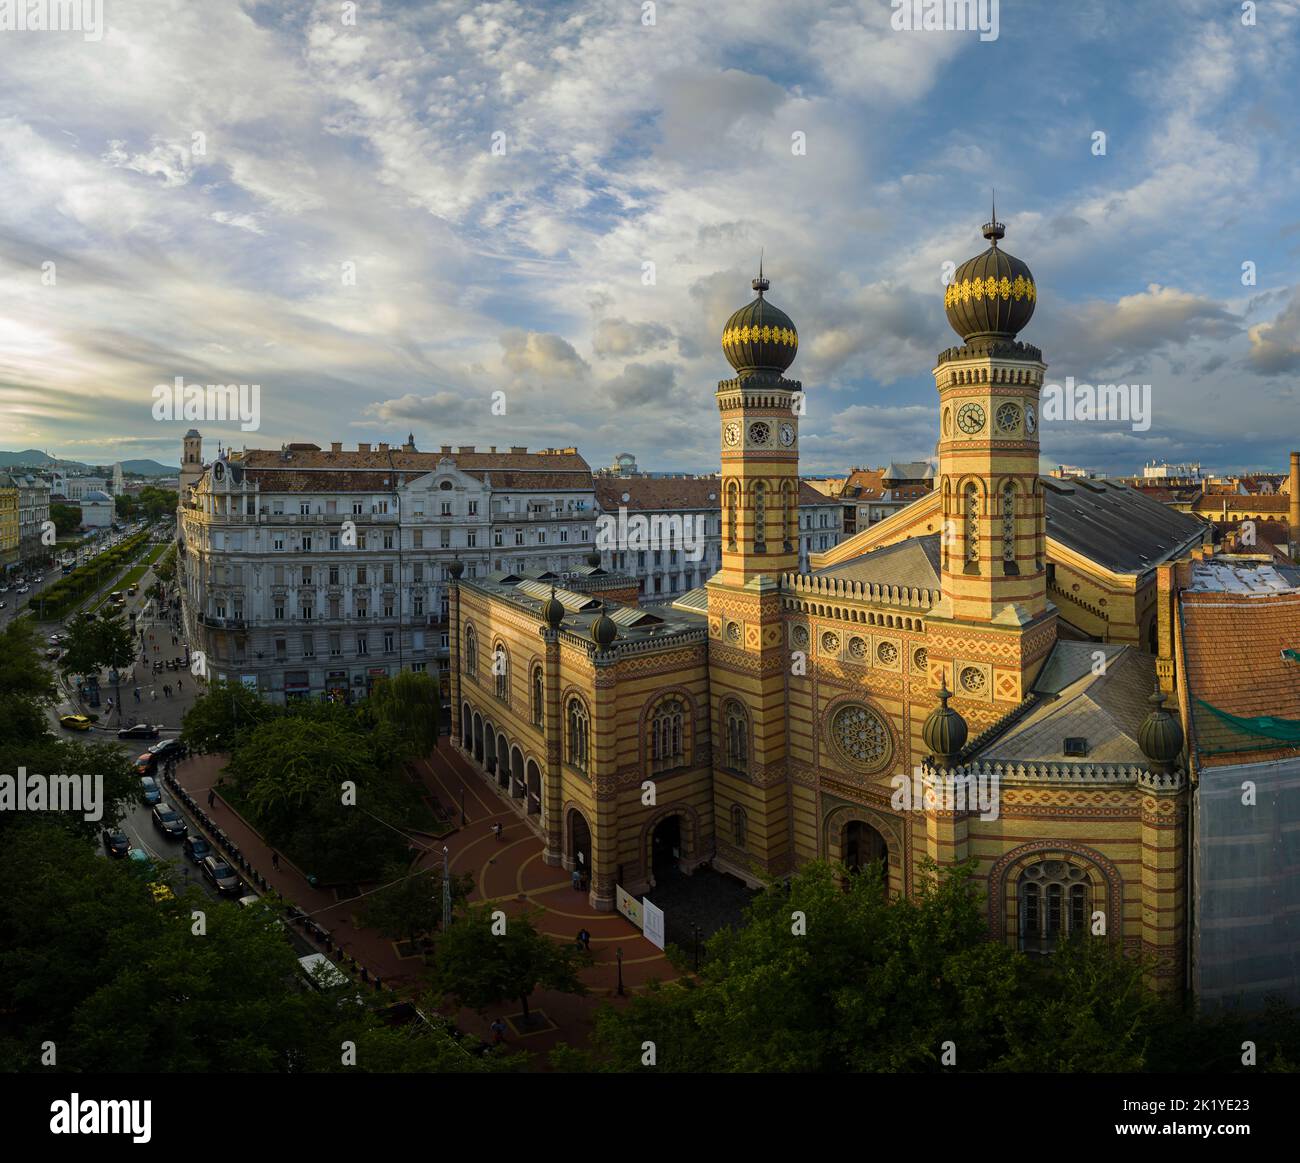 Budapest, Hungary. Dohany street Synagogue aerial view. This is an Jewish memorial center also known as the Great Synagogue or Tabakgasse Synagogue. I Stock Photo